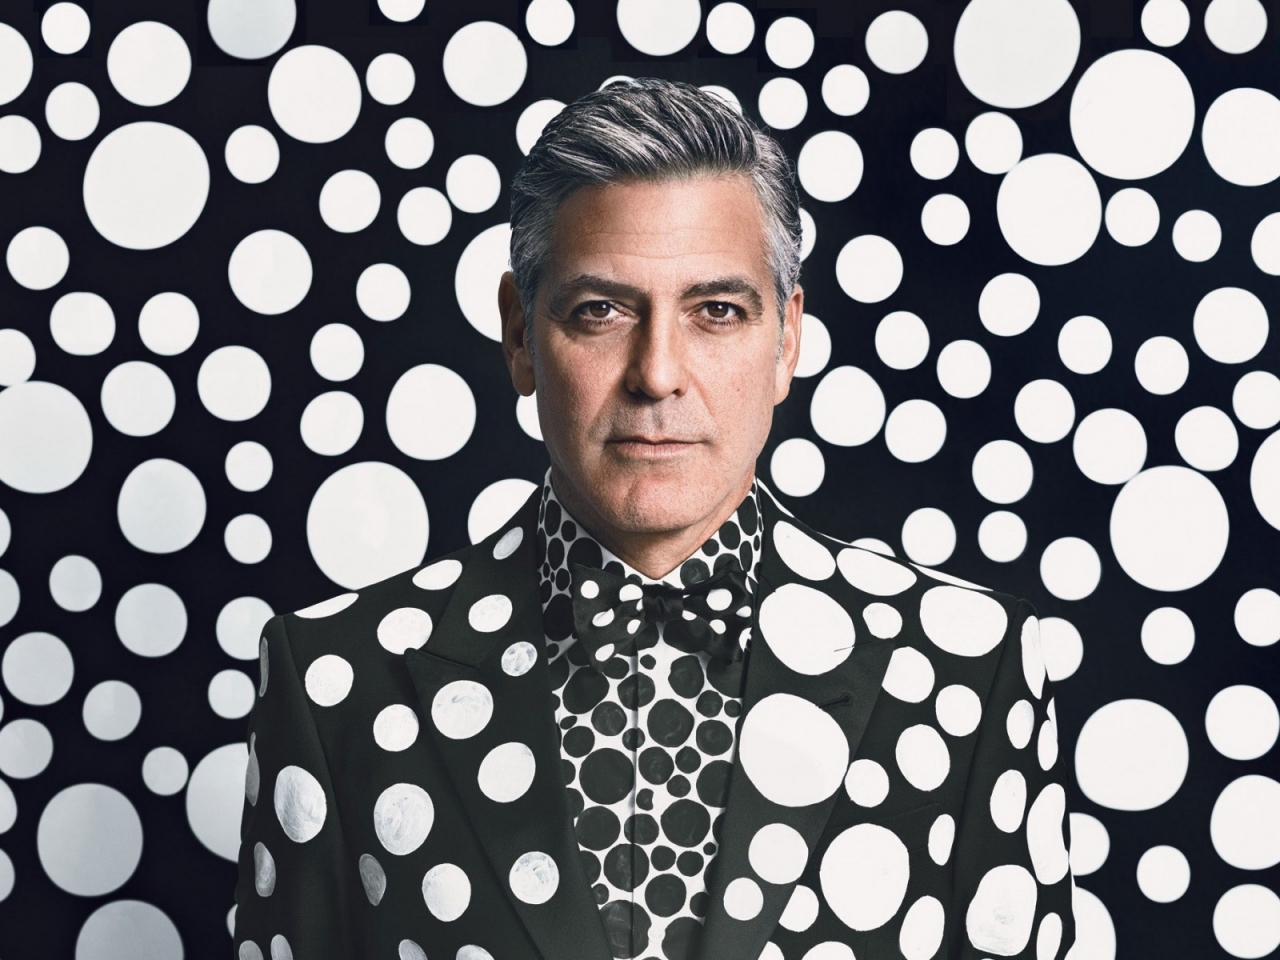 George Clooney Portrait for 1280 x 960 resolution